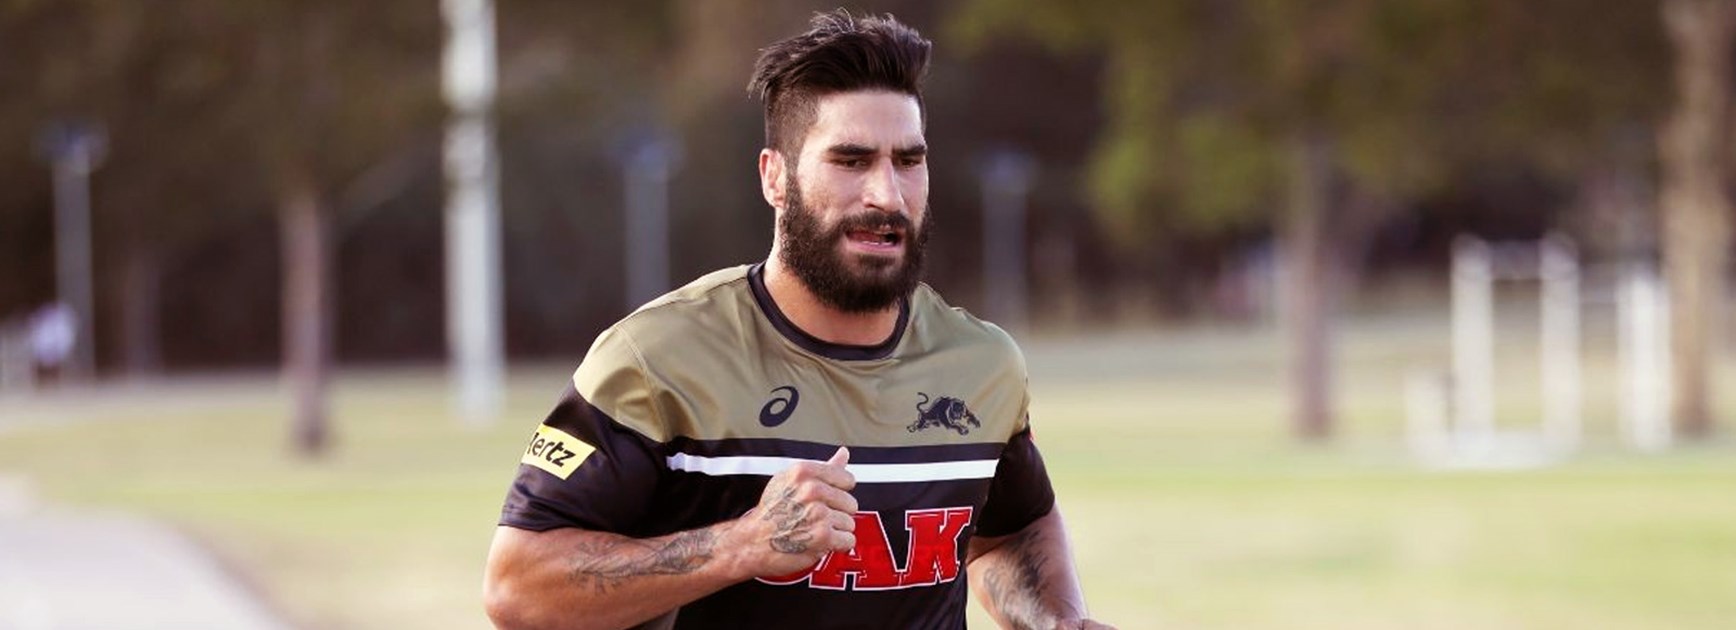 New Penrith Panthers recruit James Tamou.